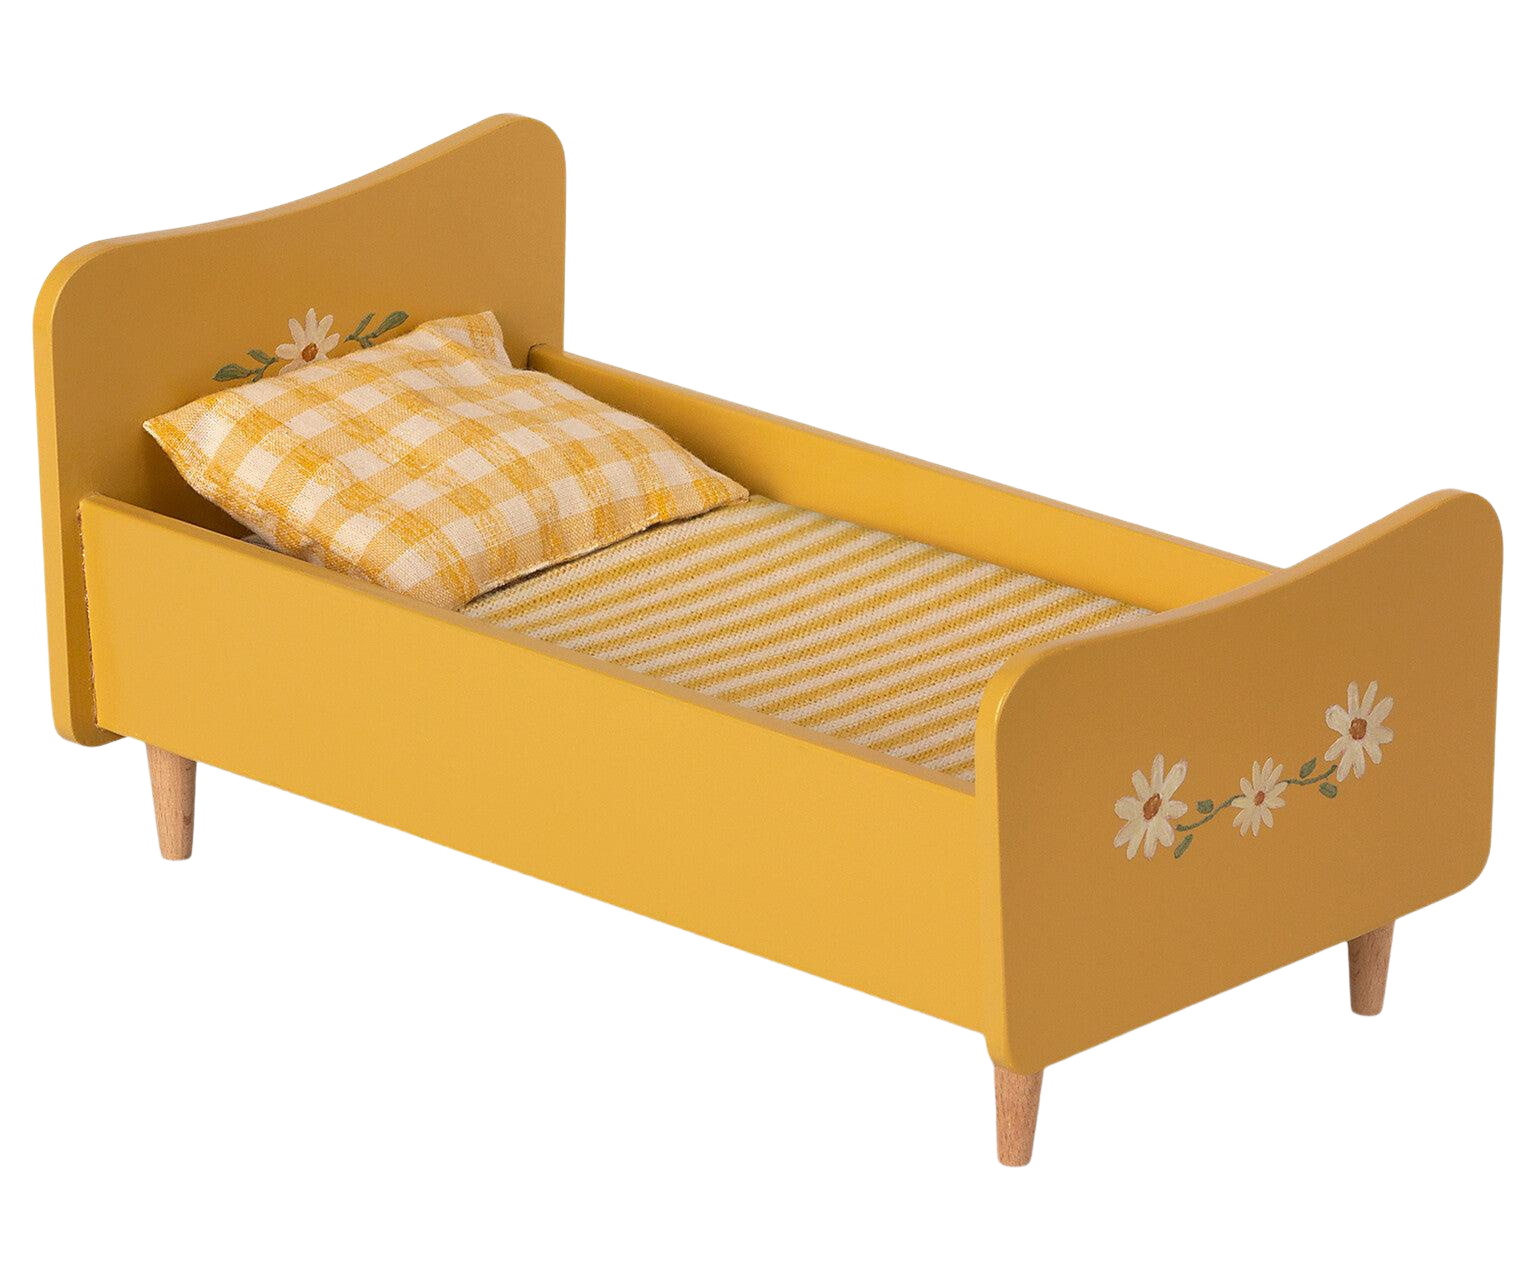 Wooden Bed, Miniature - Yellow